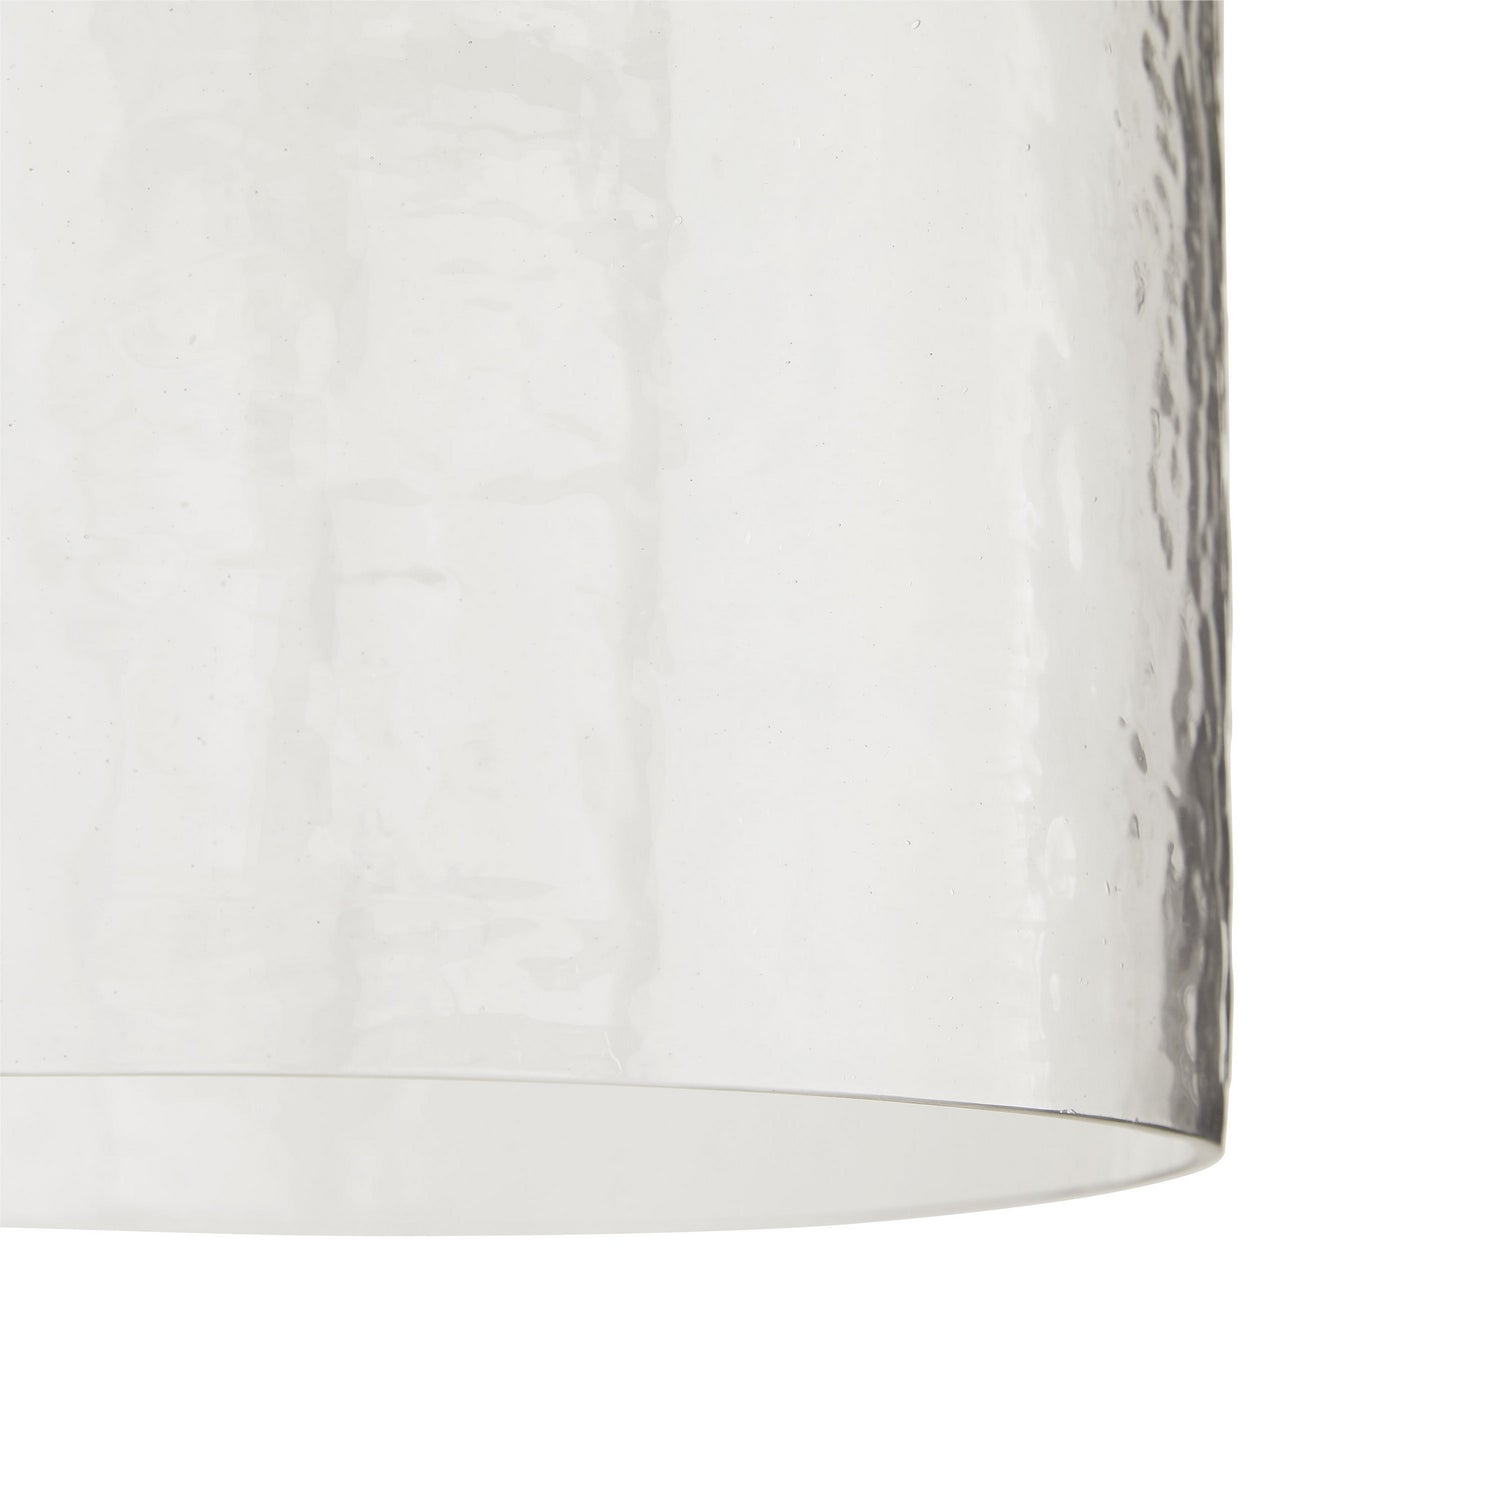 One Light Pendant from the Noreen collection in Clear Hammered finish